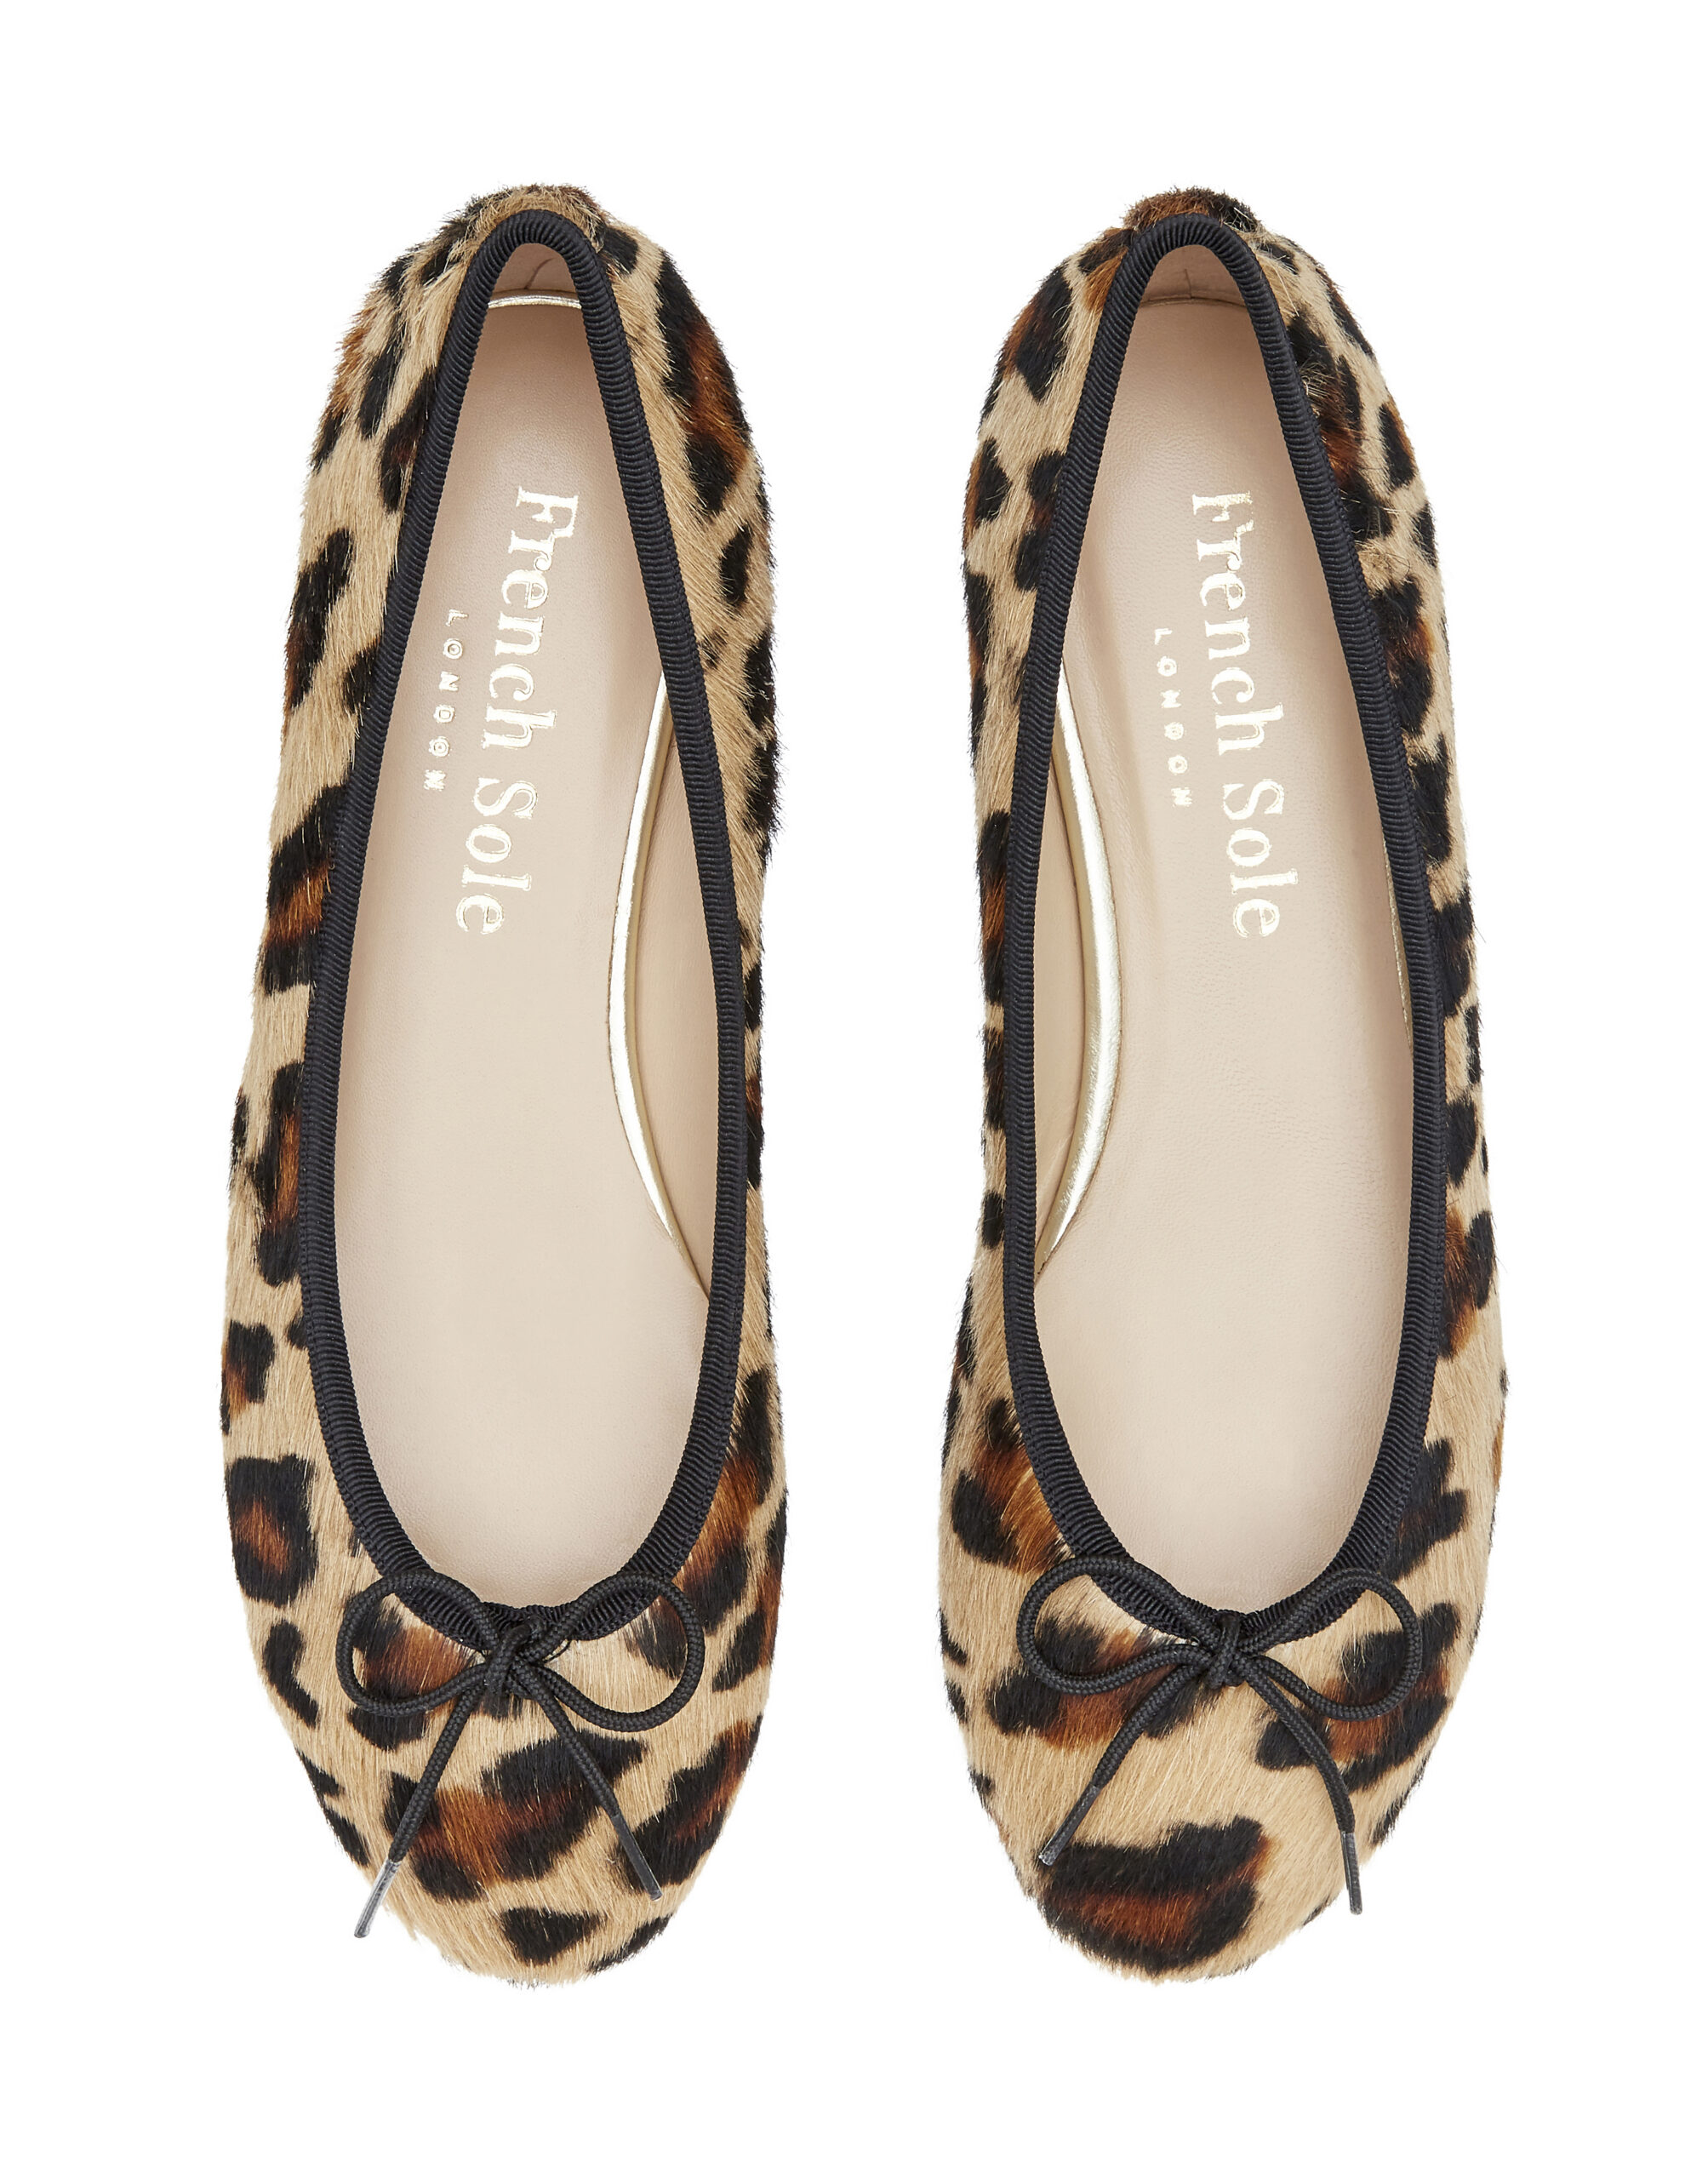 Incorporating Animal Print Ballet Flats into Your Lifestyle